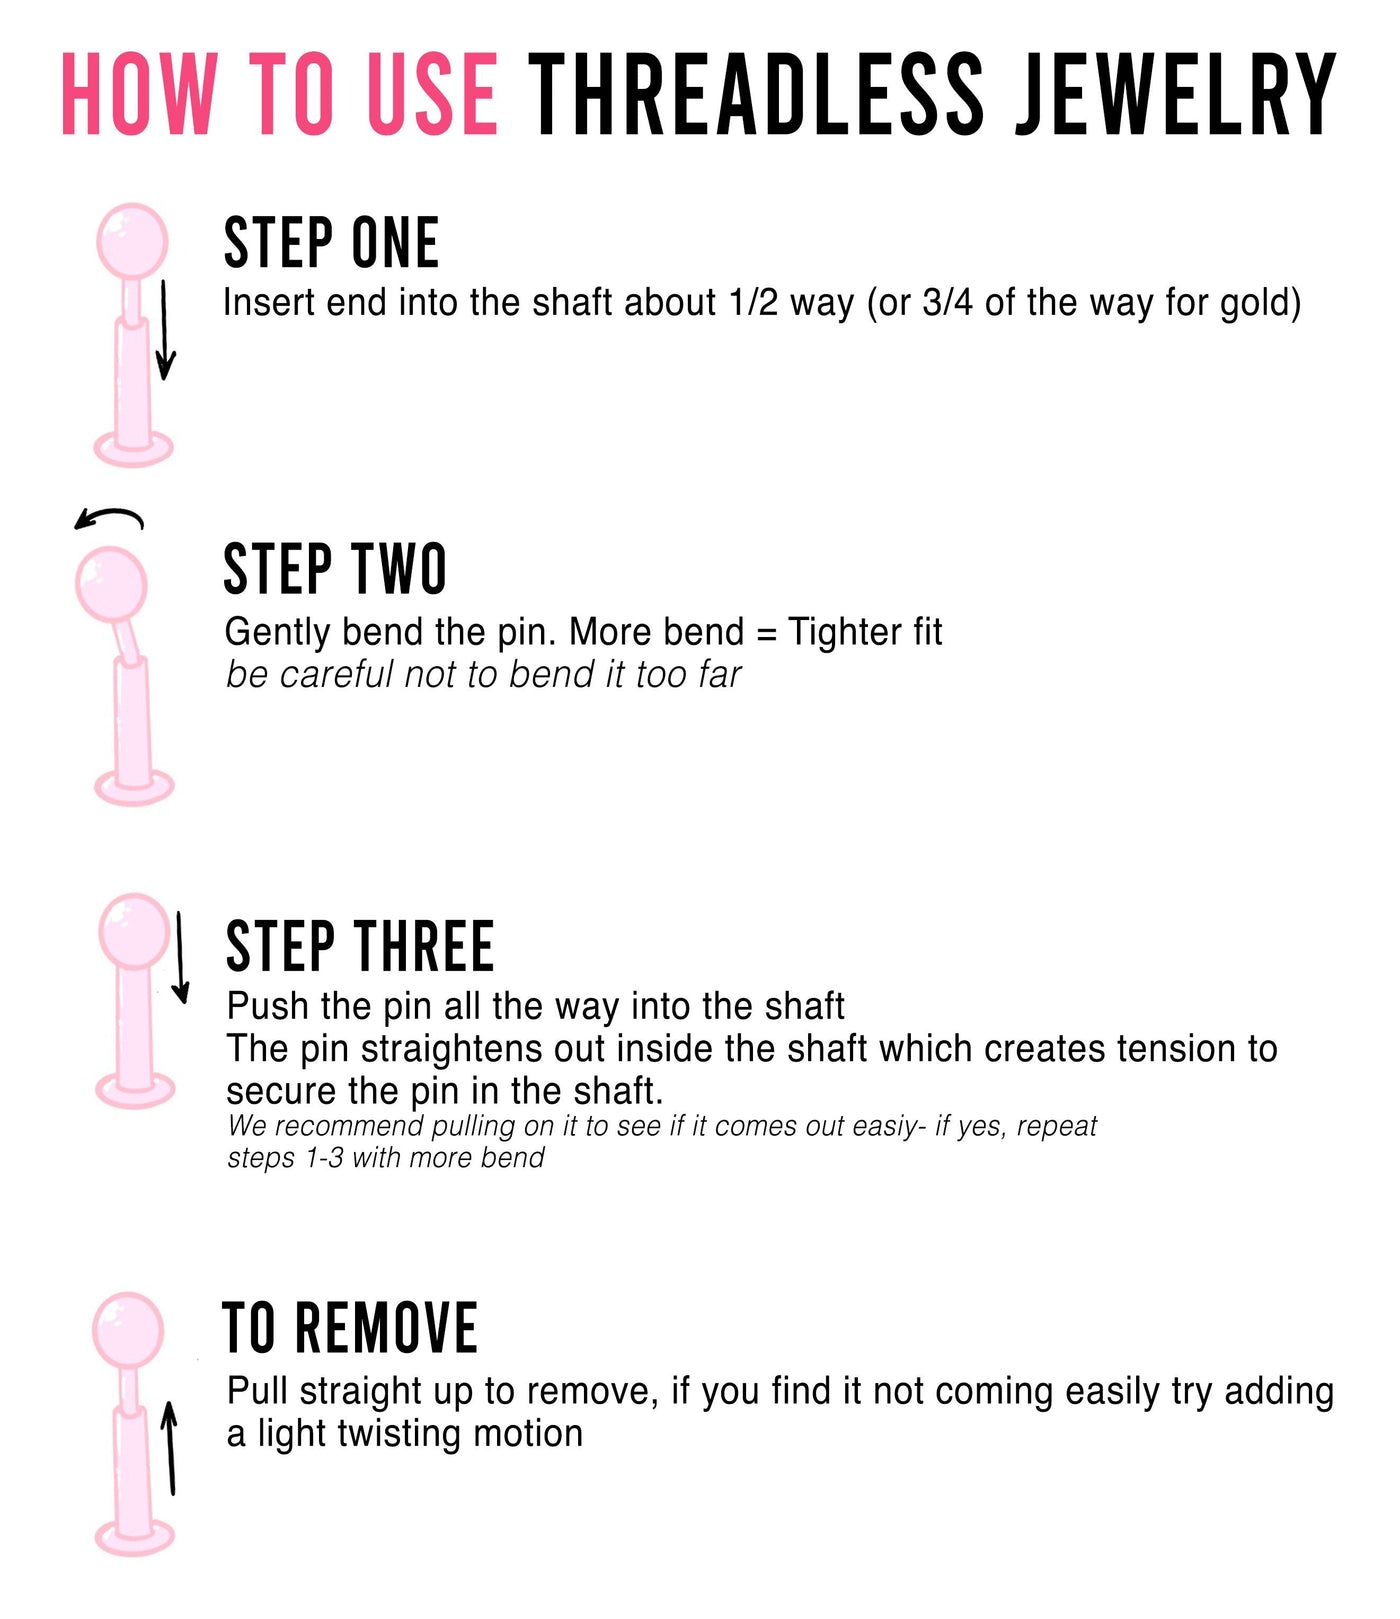 steps involved in putting in threadless jewelry